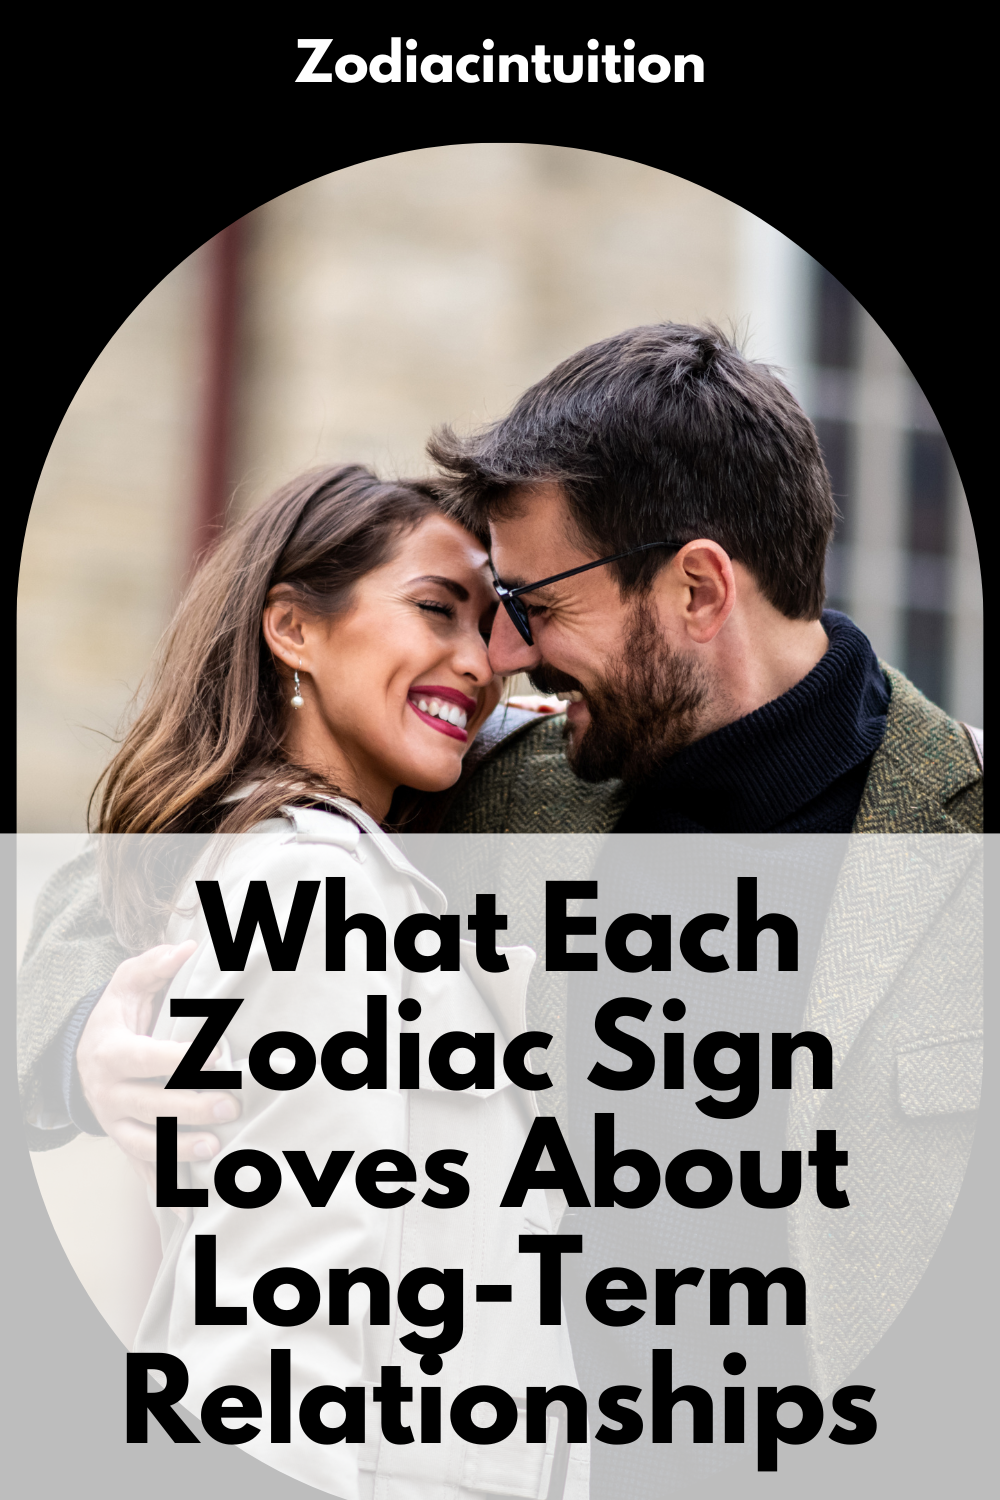 What Each Zodiac Sign Loves About Long-Term Relationships